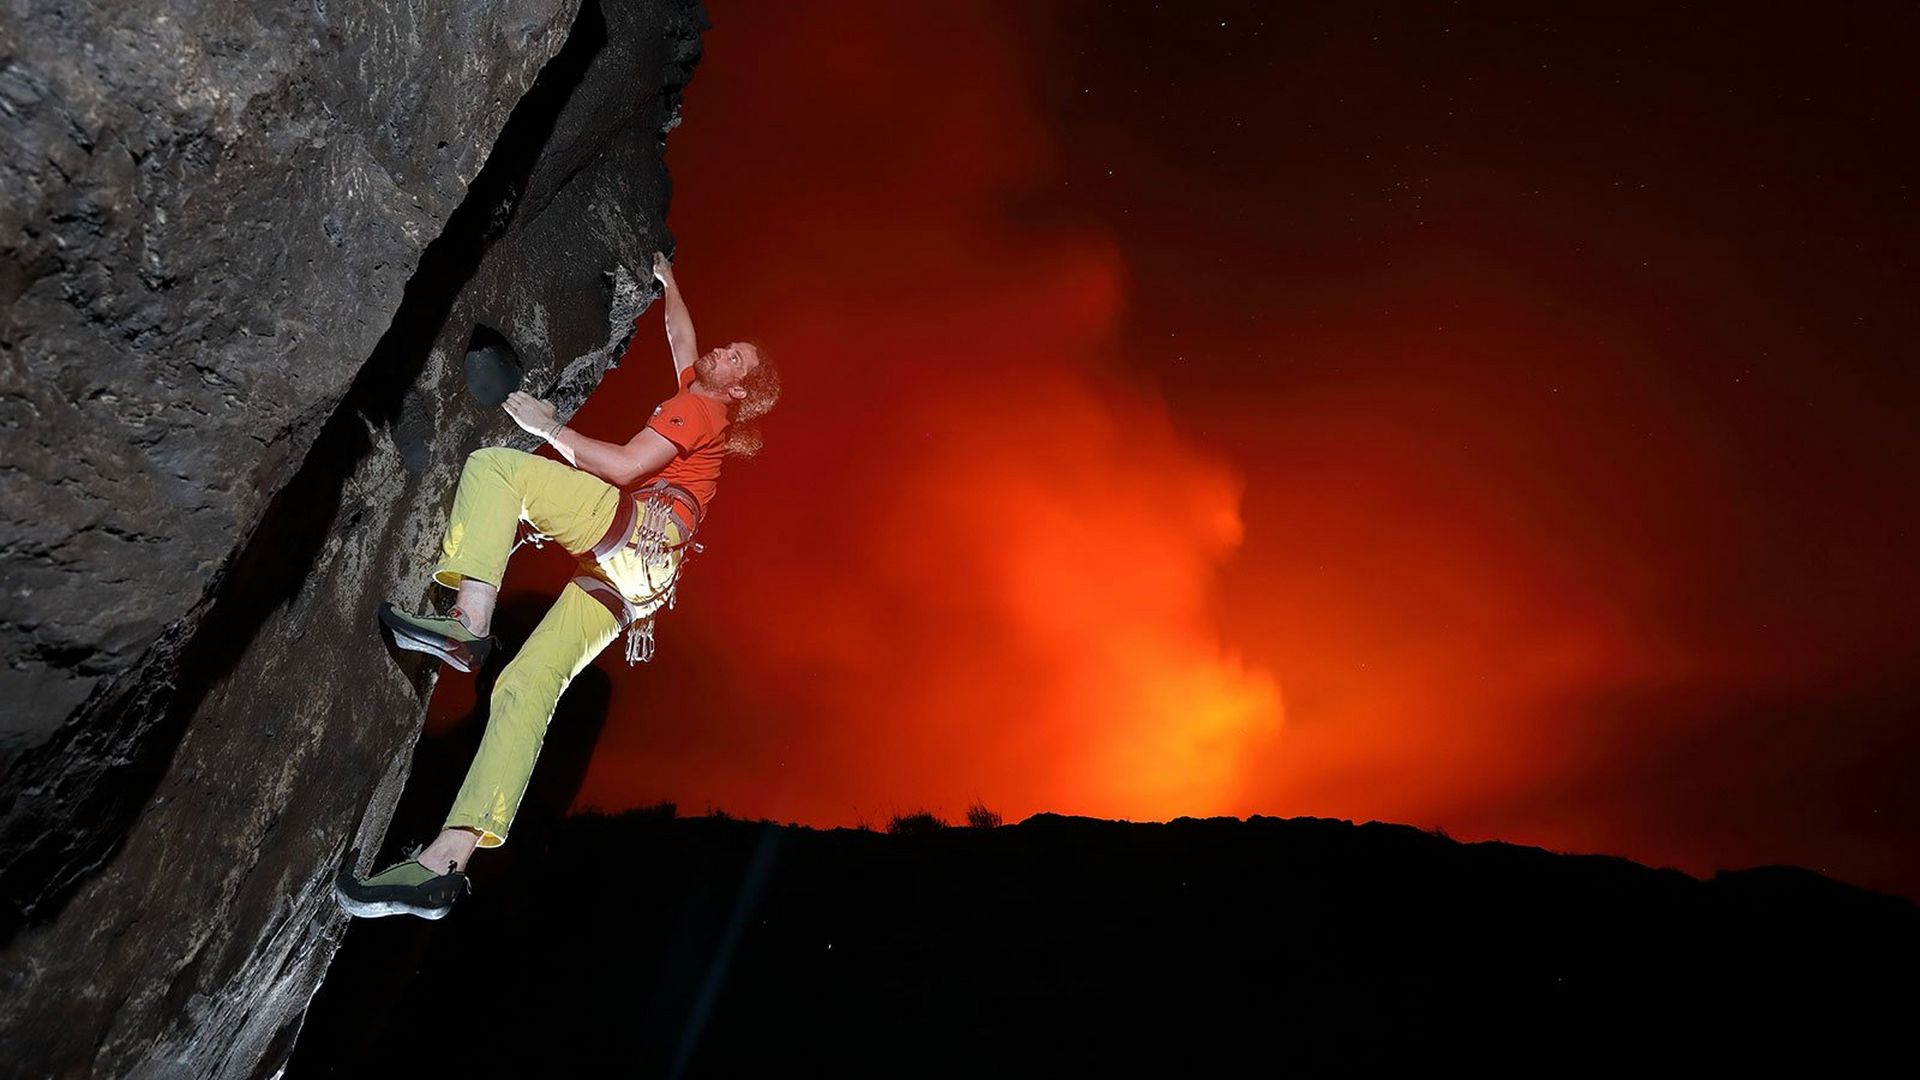 Capturing the drama of climbing a volcano with the й